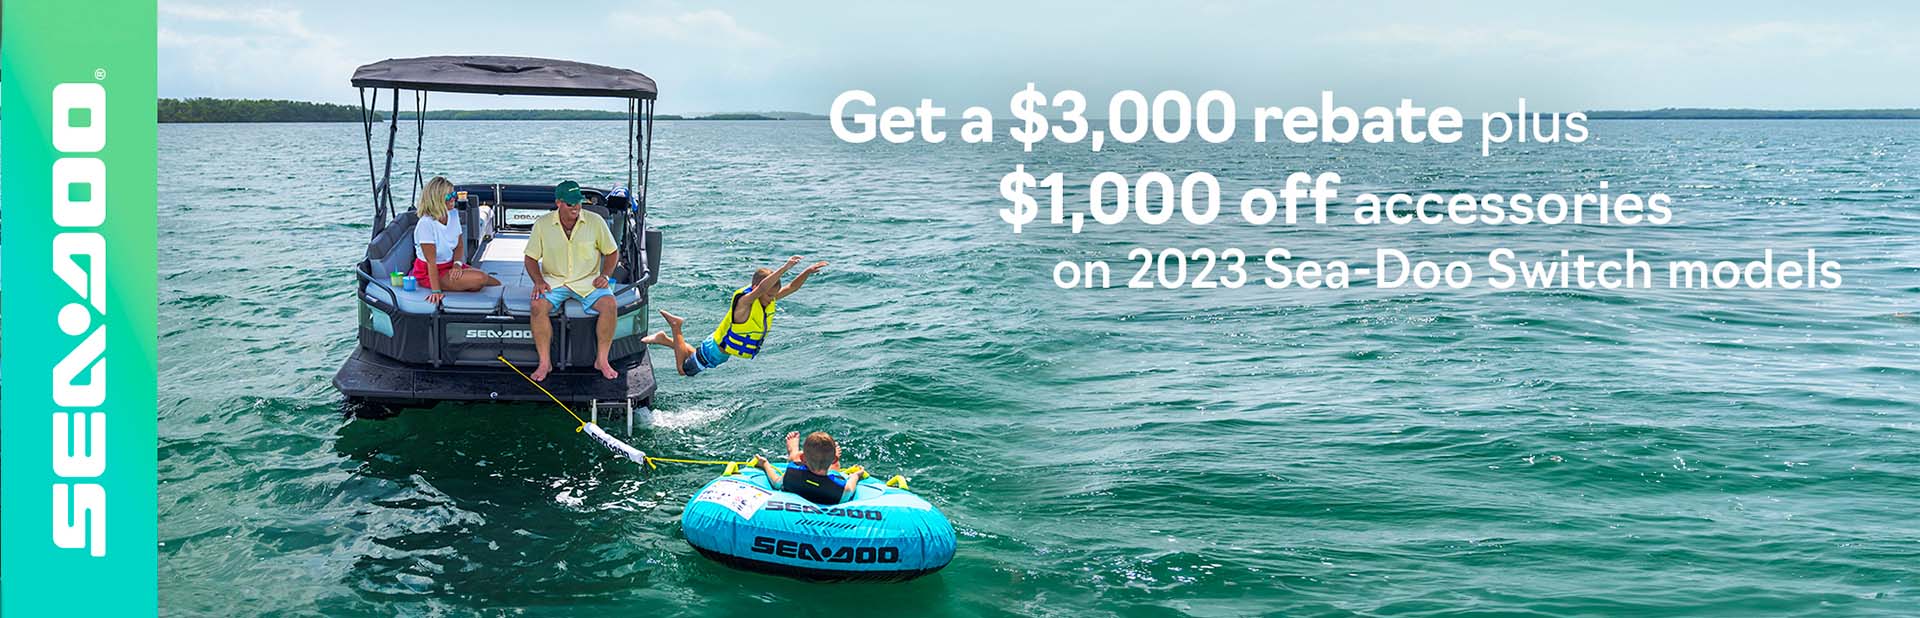 Get a $3,000 rebate plus $1,000 off accessories on all 2023 Sea-Doo Switch models